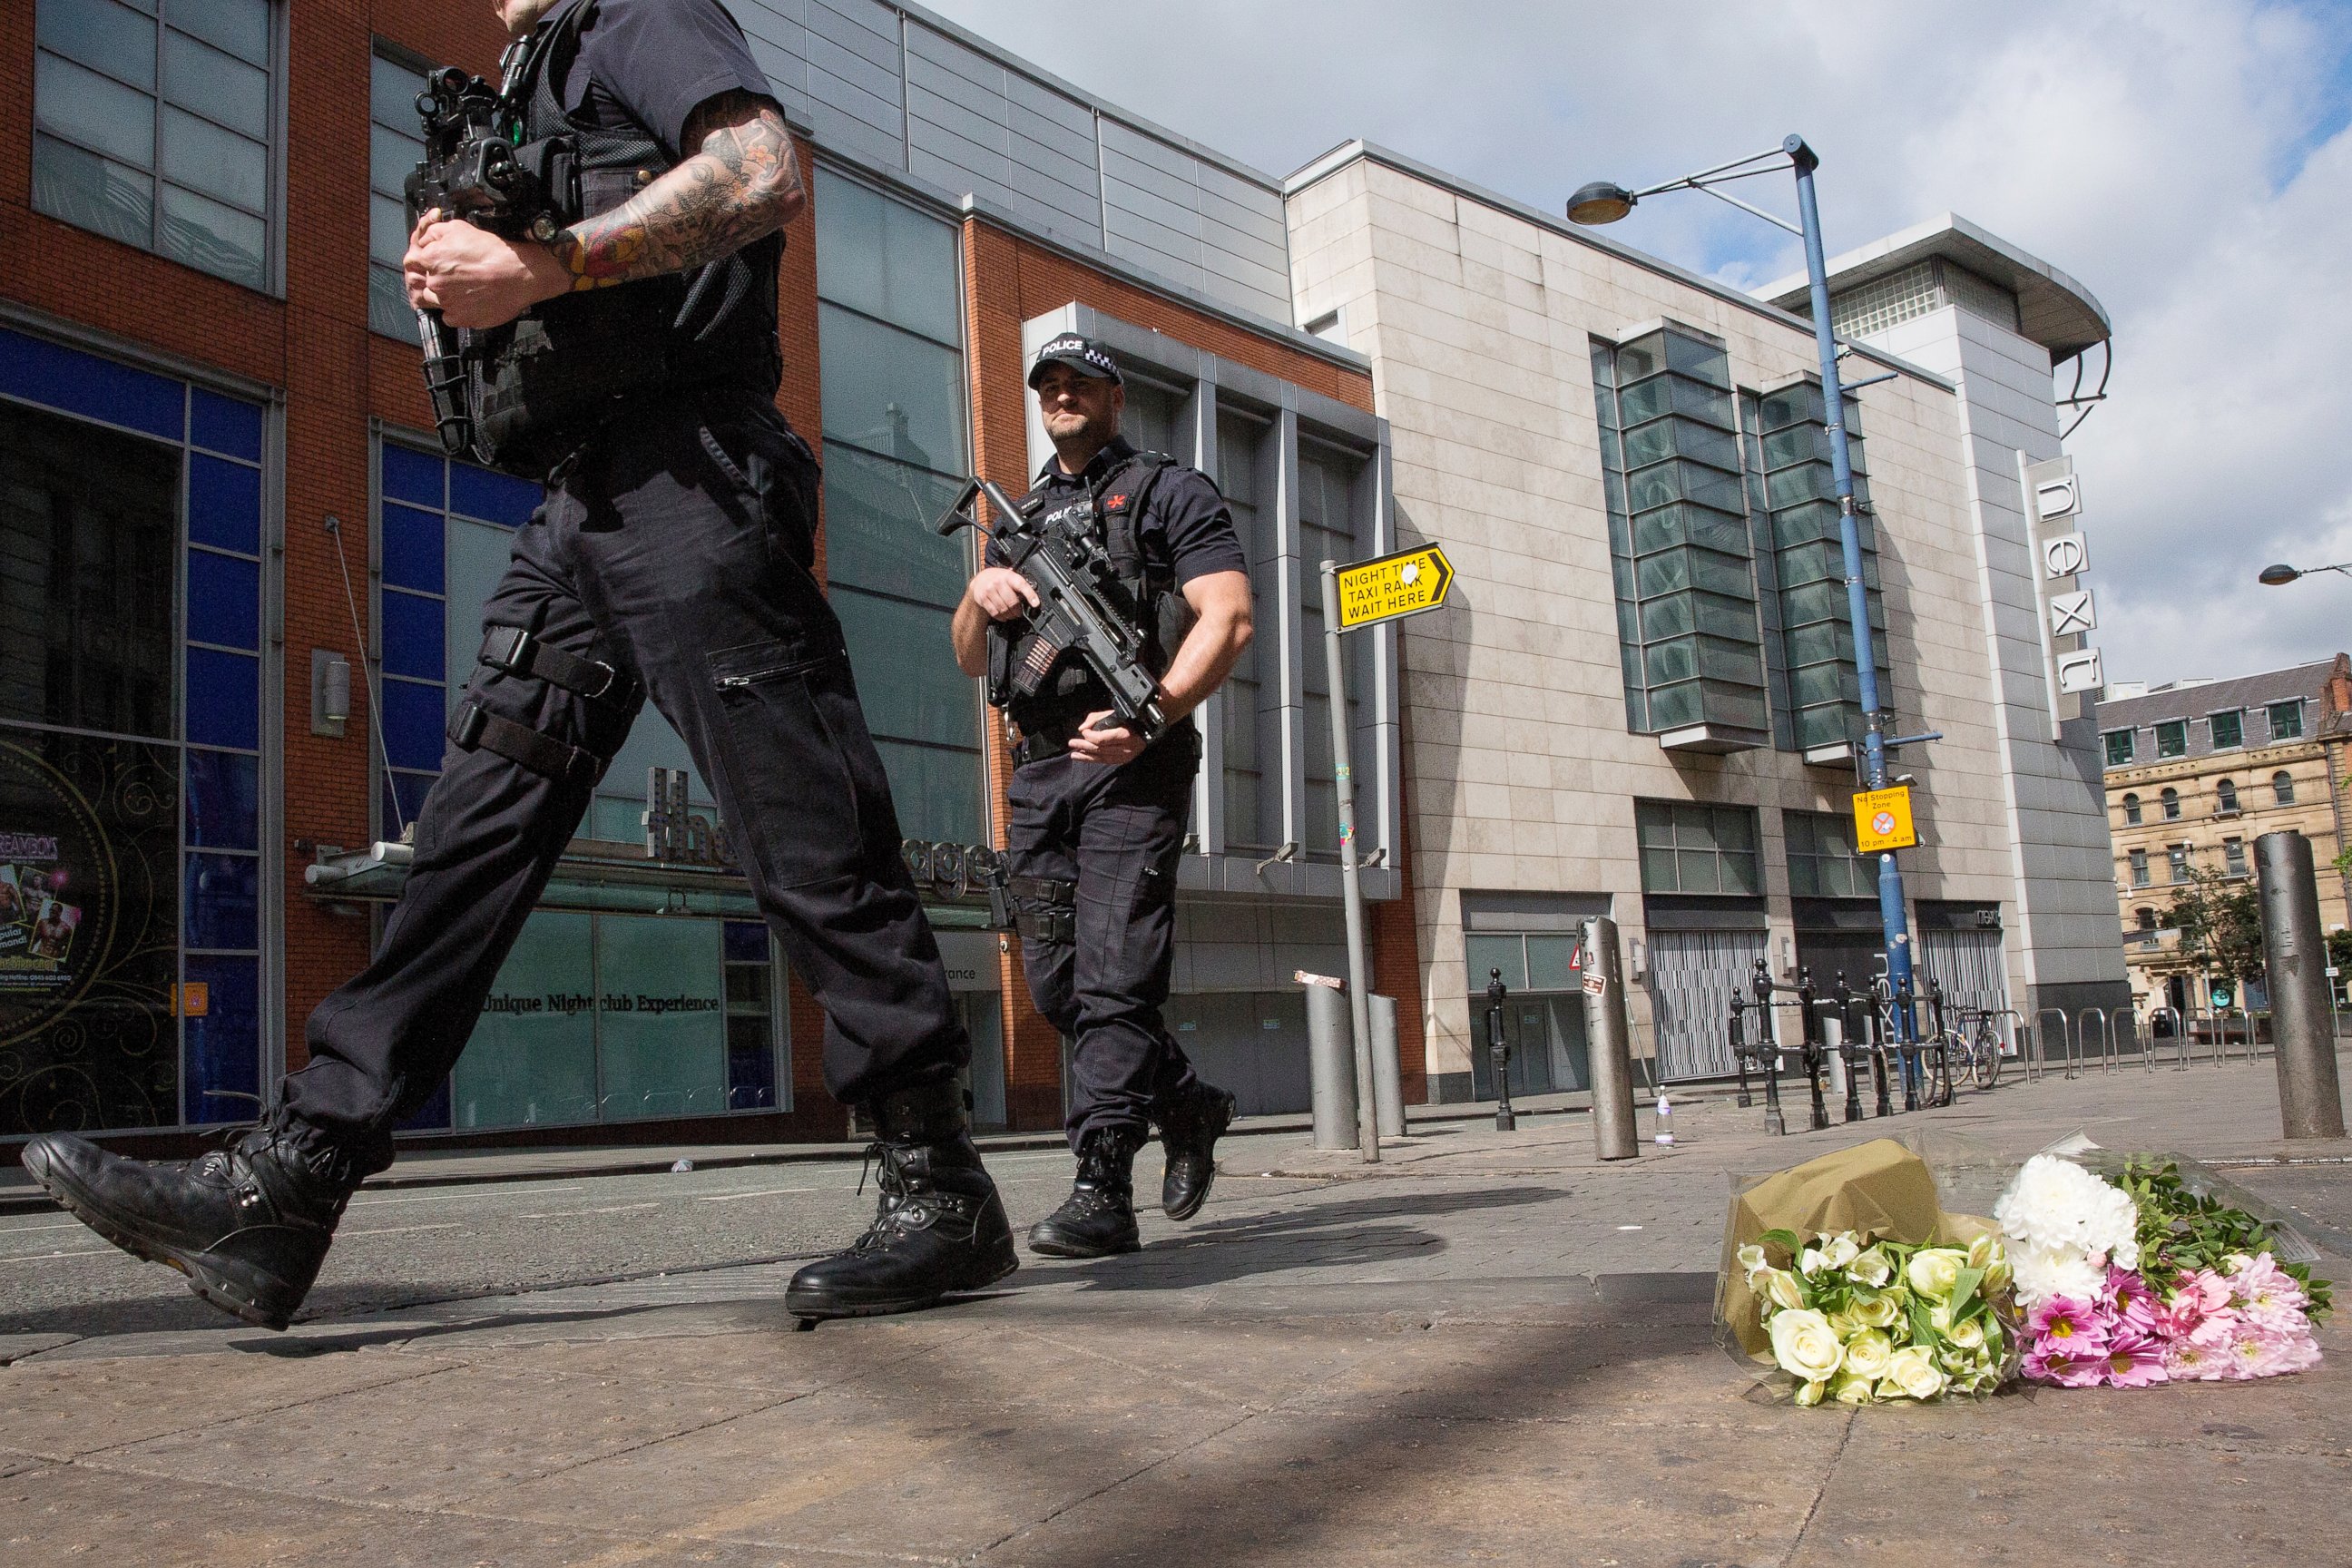 PHOTO: Armed police patrol Shudehill as they walk past floral tributes to victims, May 23, 2017, in Manchester, England.